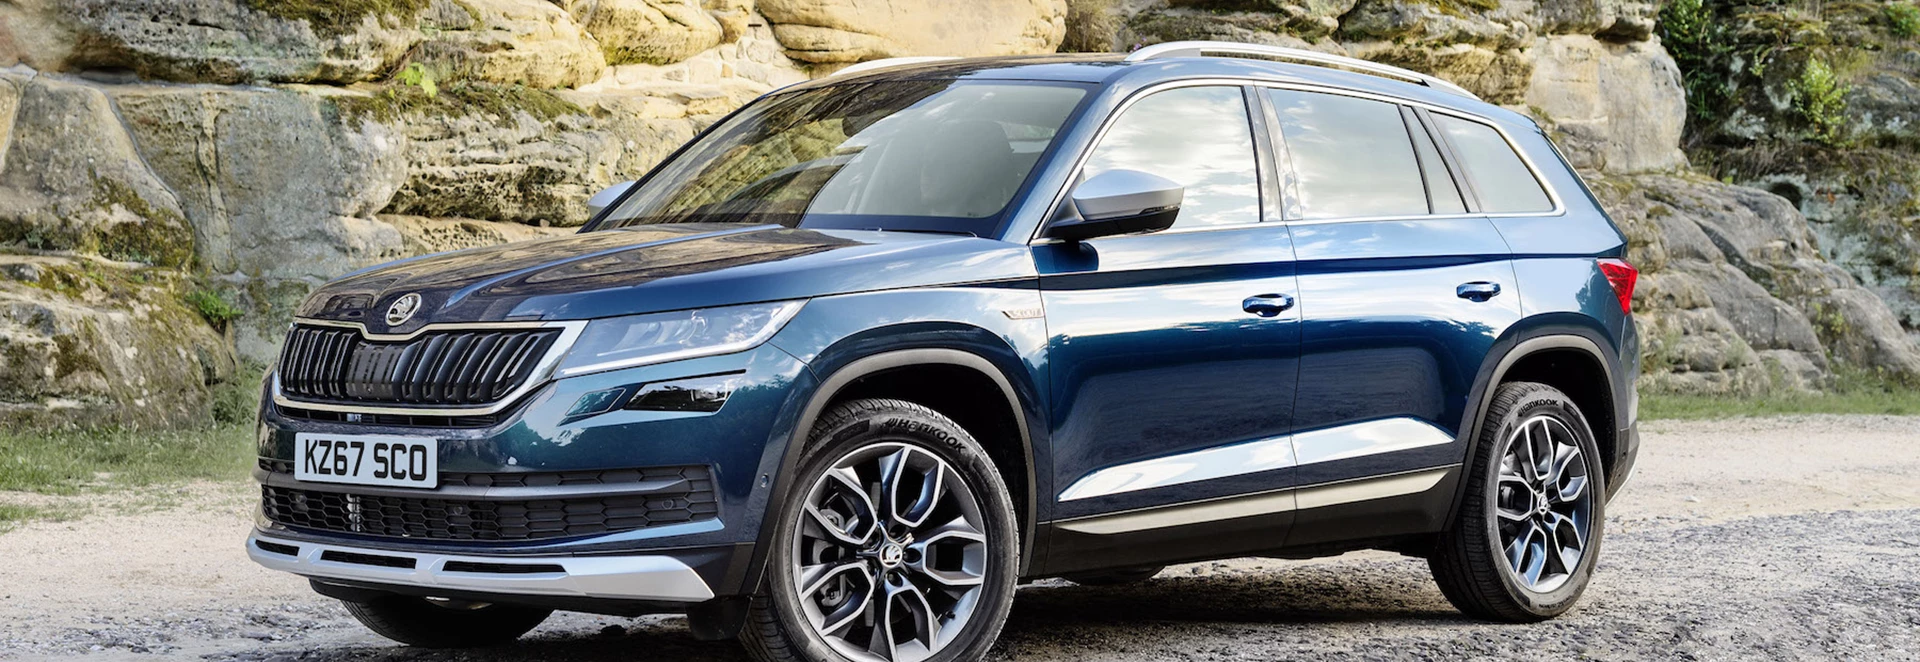 Skoda adds Scout edition to the Kodiaq line-up 